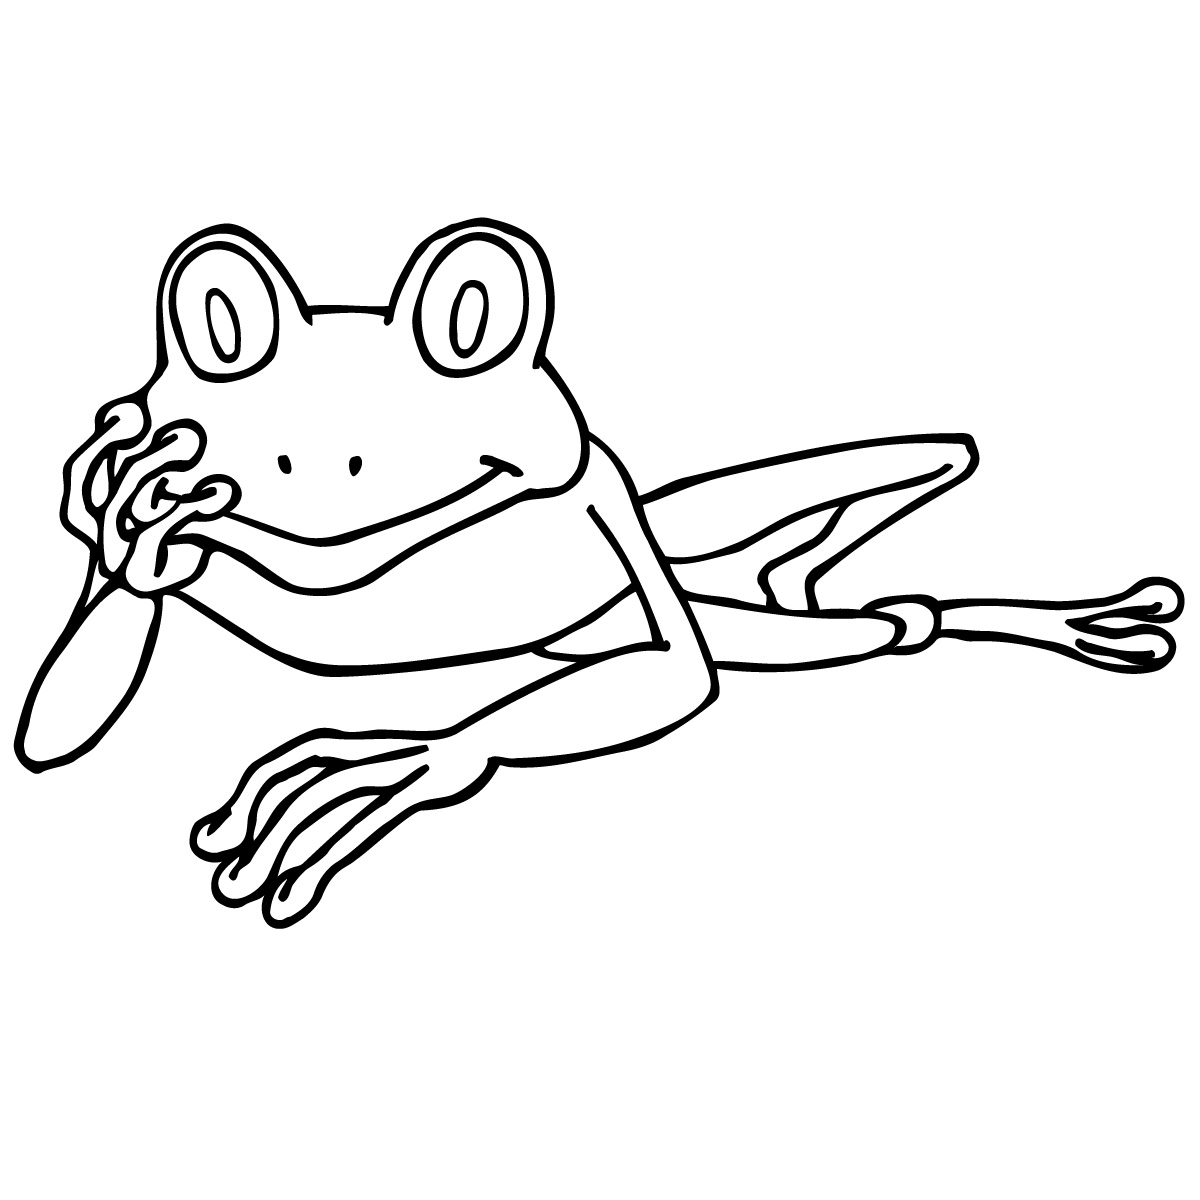 Coloring page frog - Coloring Pages & Pictures - IMAGIXS